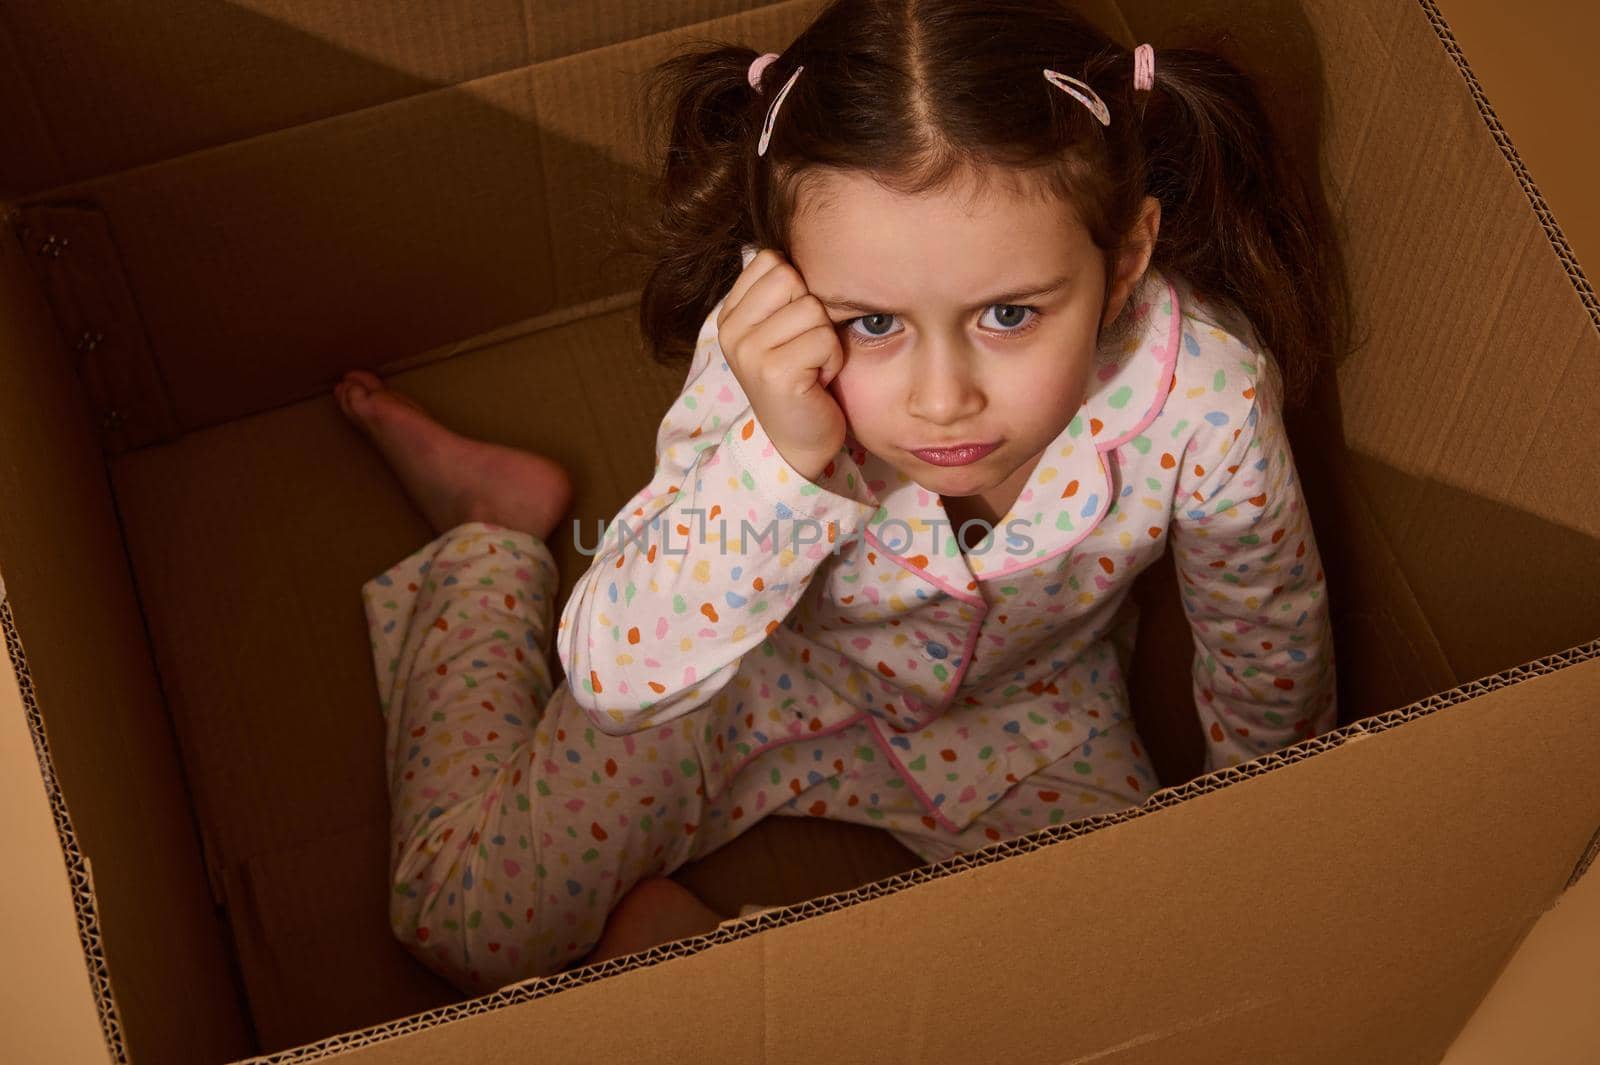 Studio shot of a beautiful upset little child girl looking at the camera in disappointment while inside a cardboard box. Emotional studio portrait against beige background with copy ad space by artgf